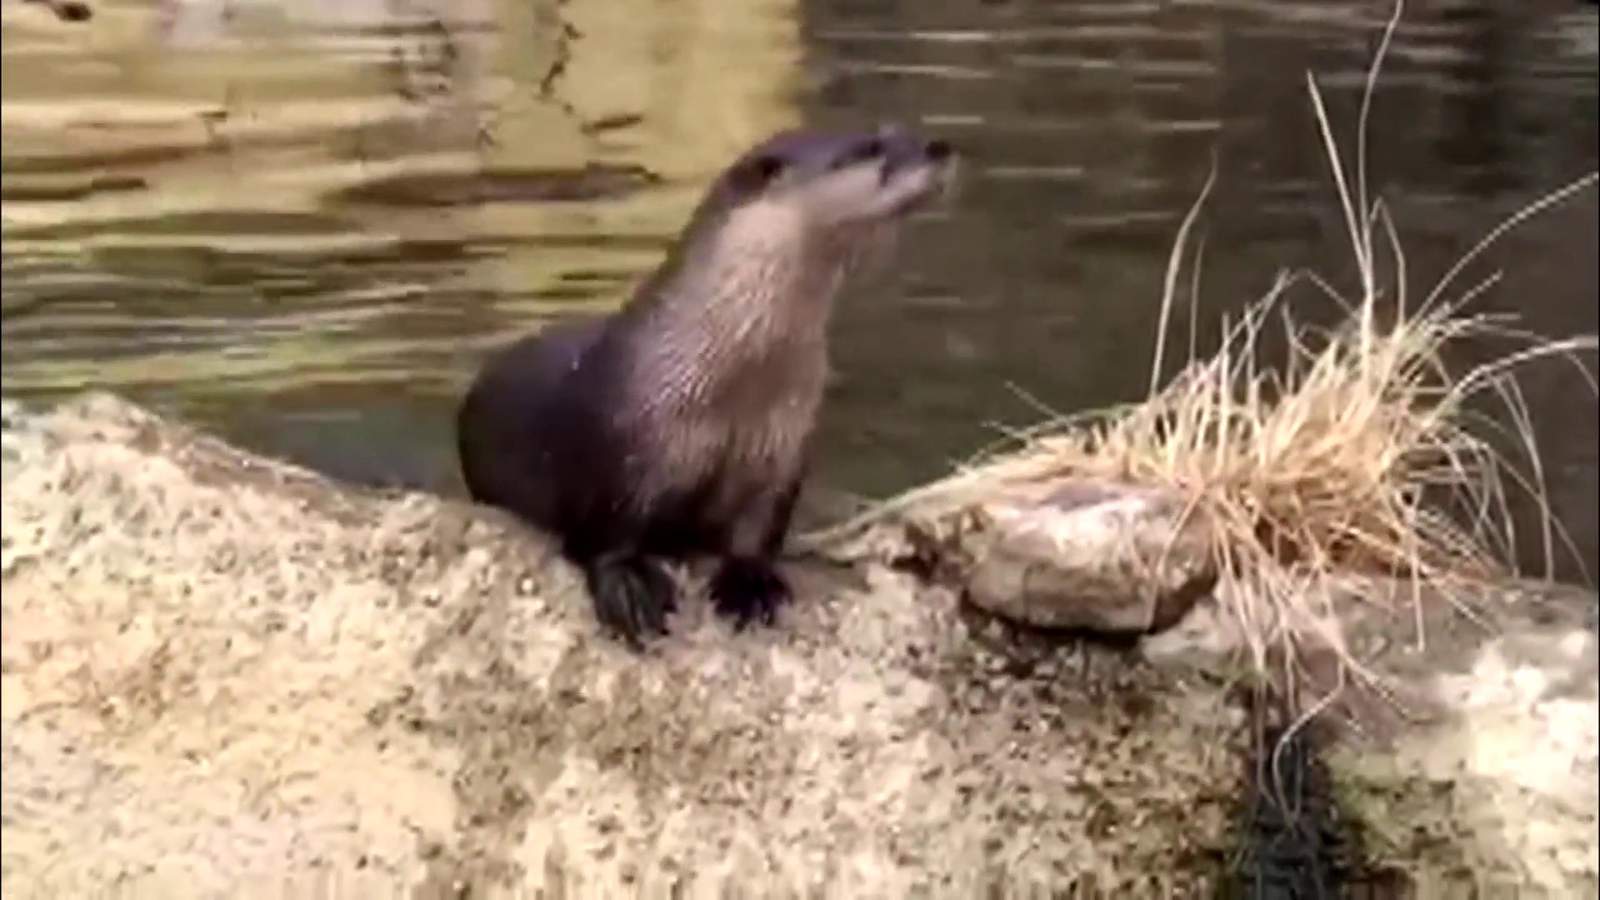 WATCH: Behind-the-scenes look at the Detroit Zoo’s otter exhibit